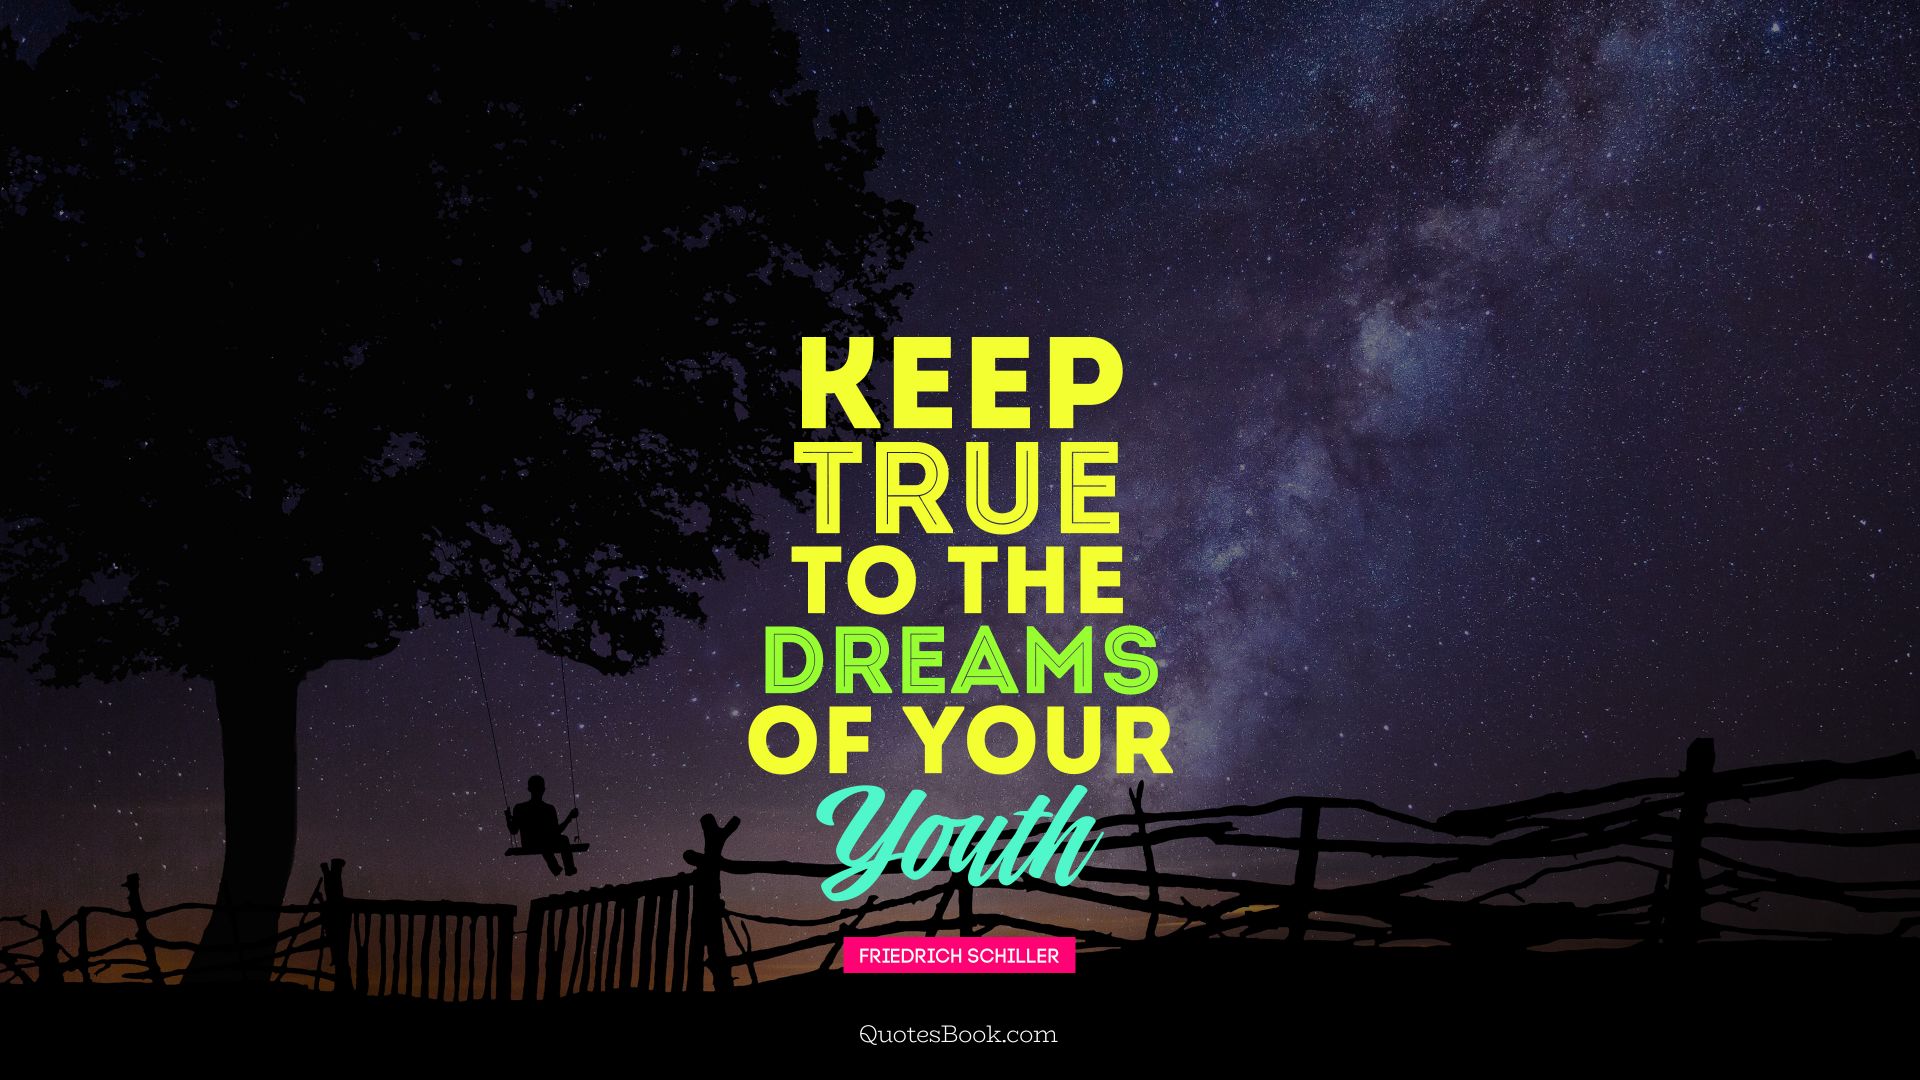 Keep true to the dreams of your youth. - Quote by Friedrich Schiller